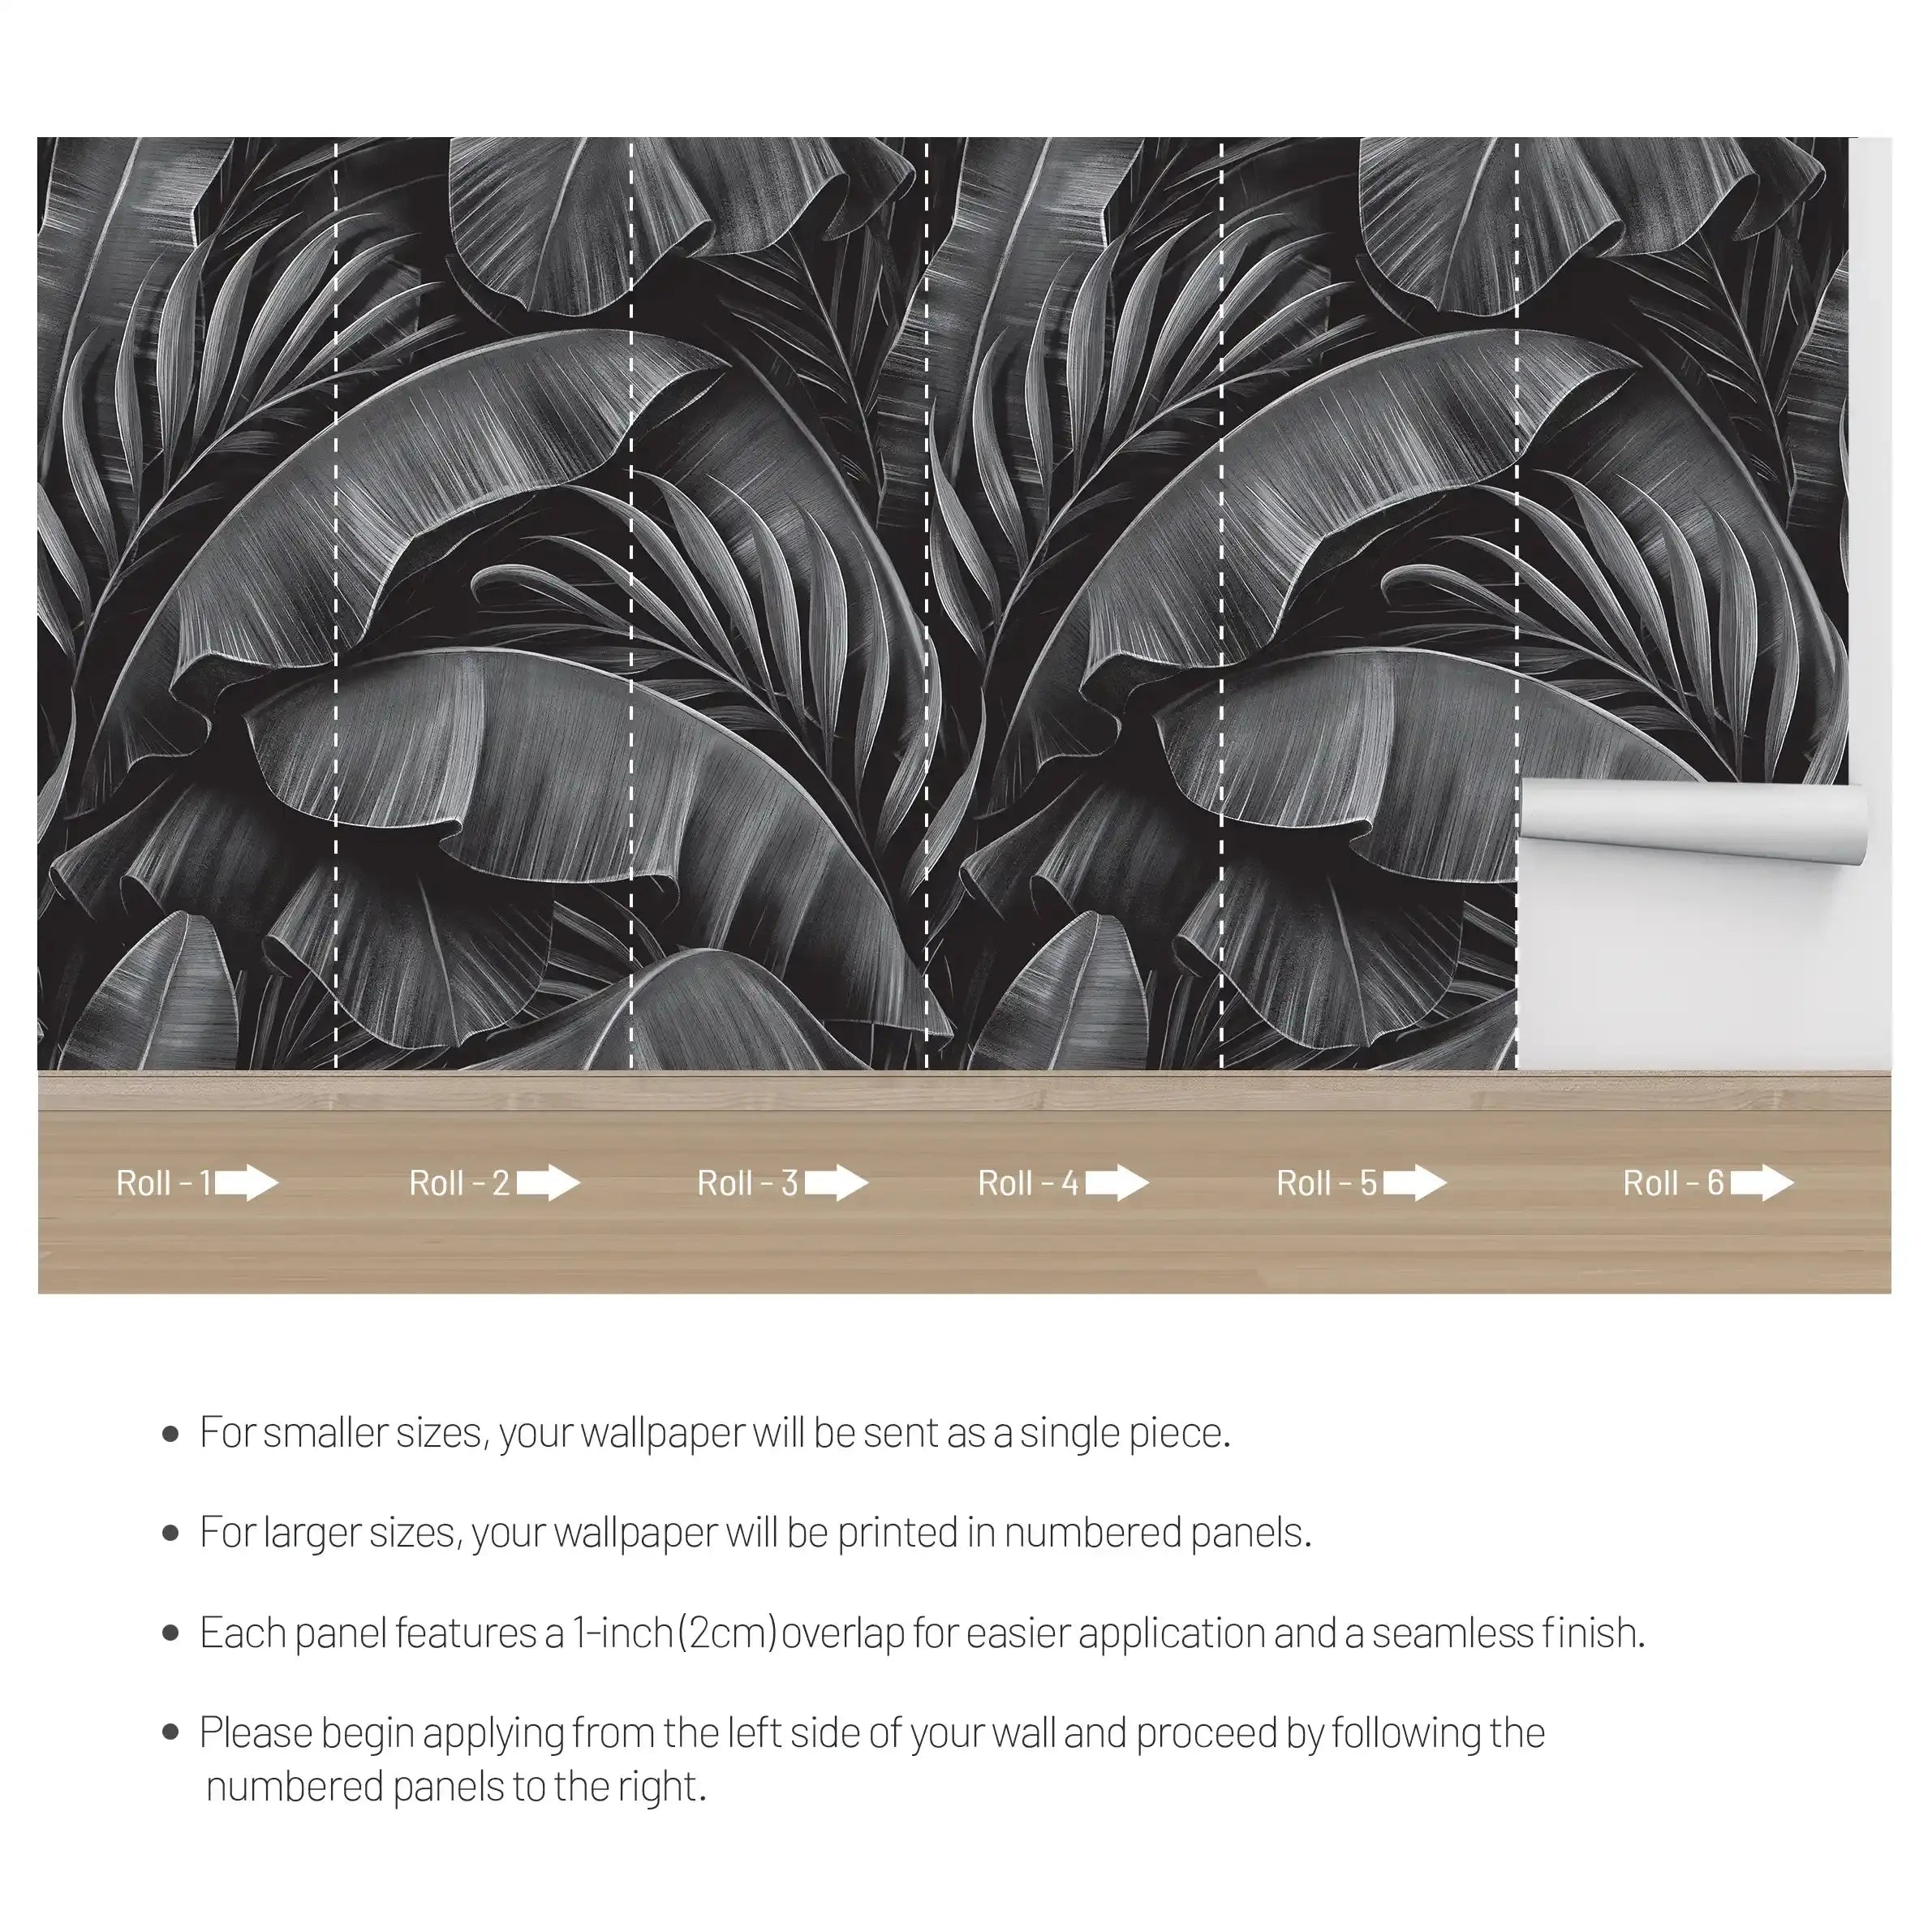 3026-E / Tropical Jungle Leaves Wallpaper, Peel and Stick Mural, Ideal for Bathroom, Bedroom, and Kitchen - Artevella